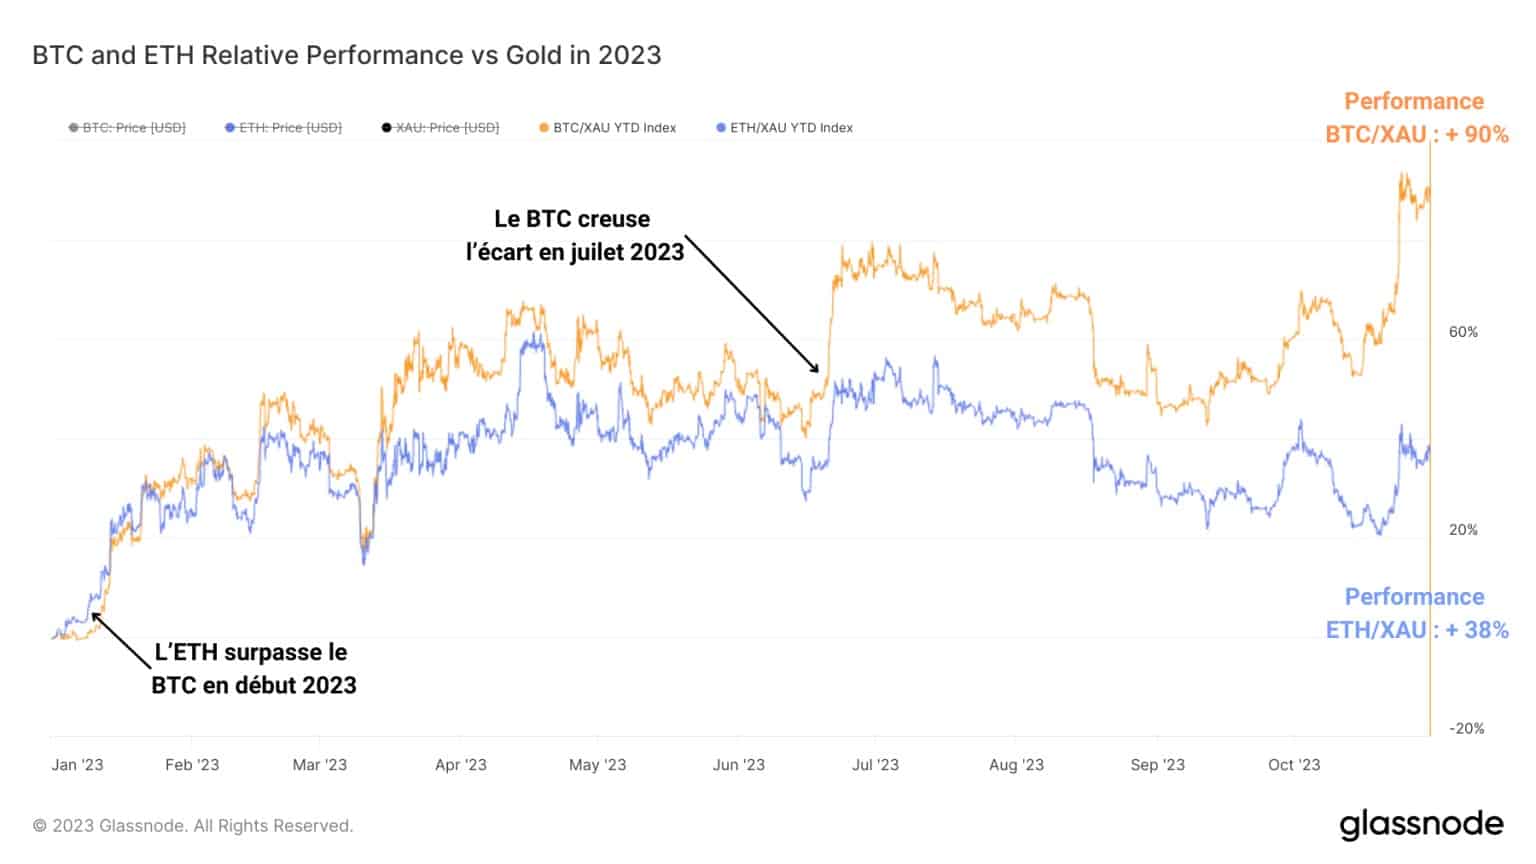 Figure 3: Relative performance of BTC and ETH versus gold